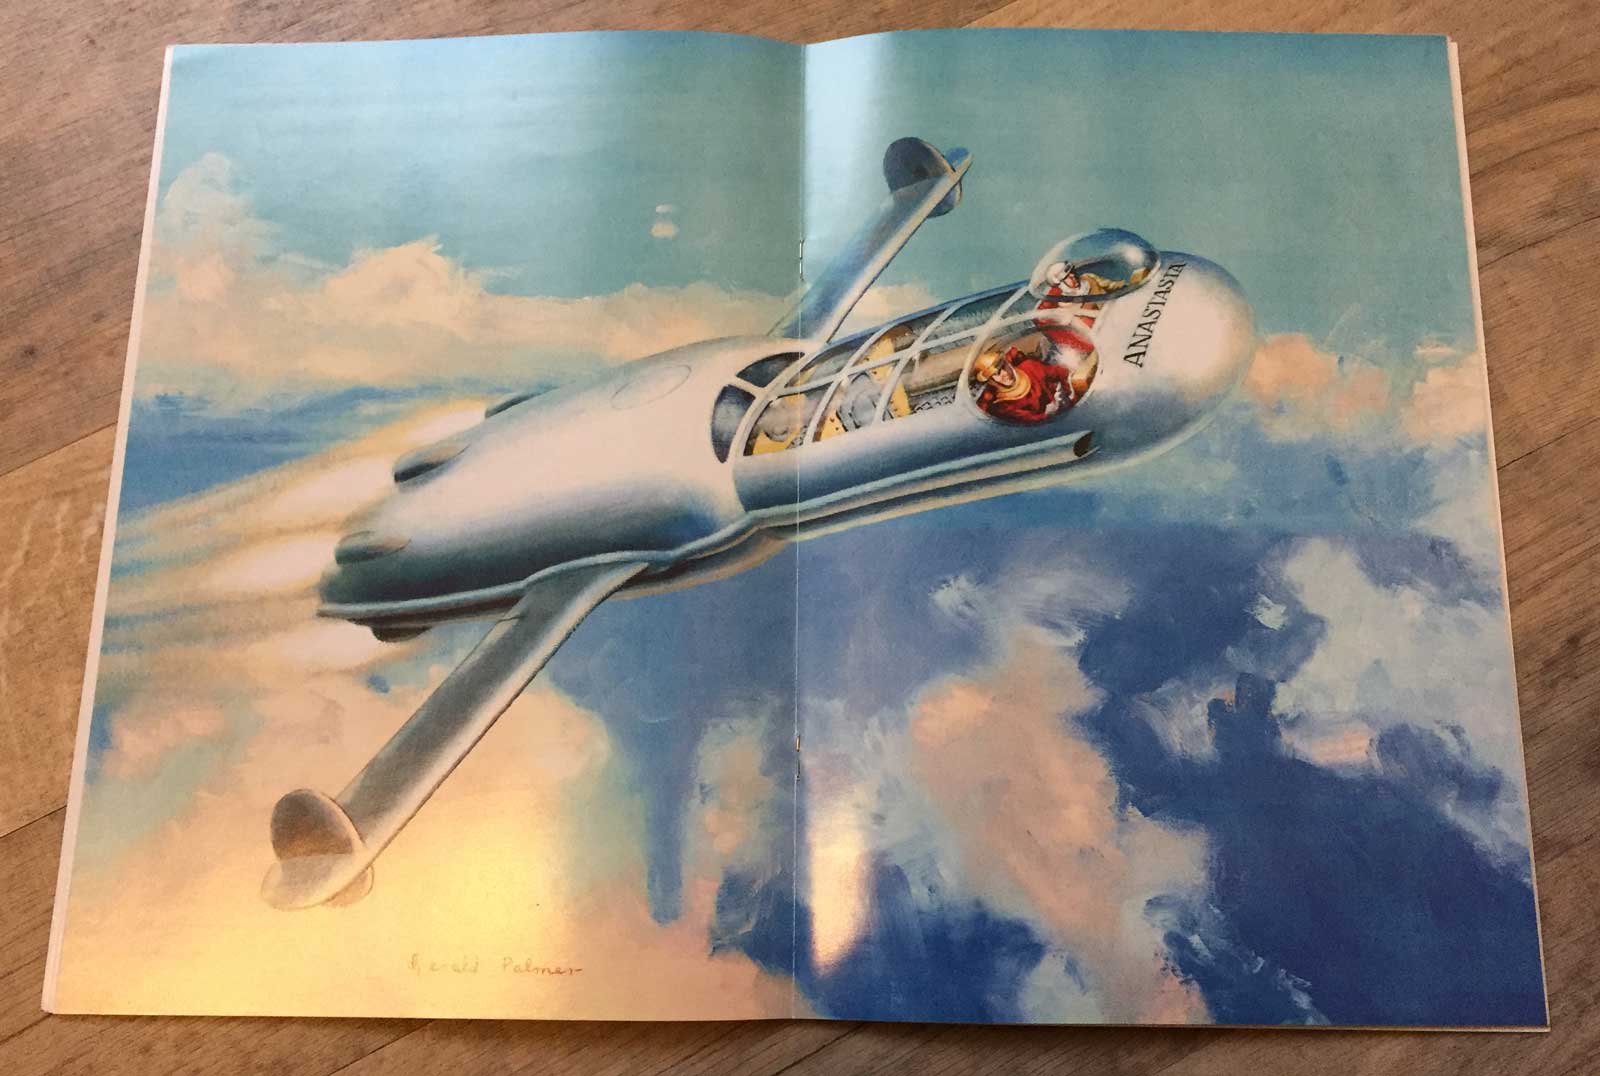 Spaceship Away Issue 8 features a centre spread by Gerald of the Anastasia, Dan Dare's personal spacecraft, in atmospheric flight.